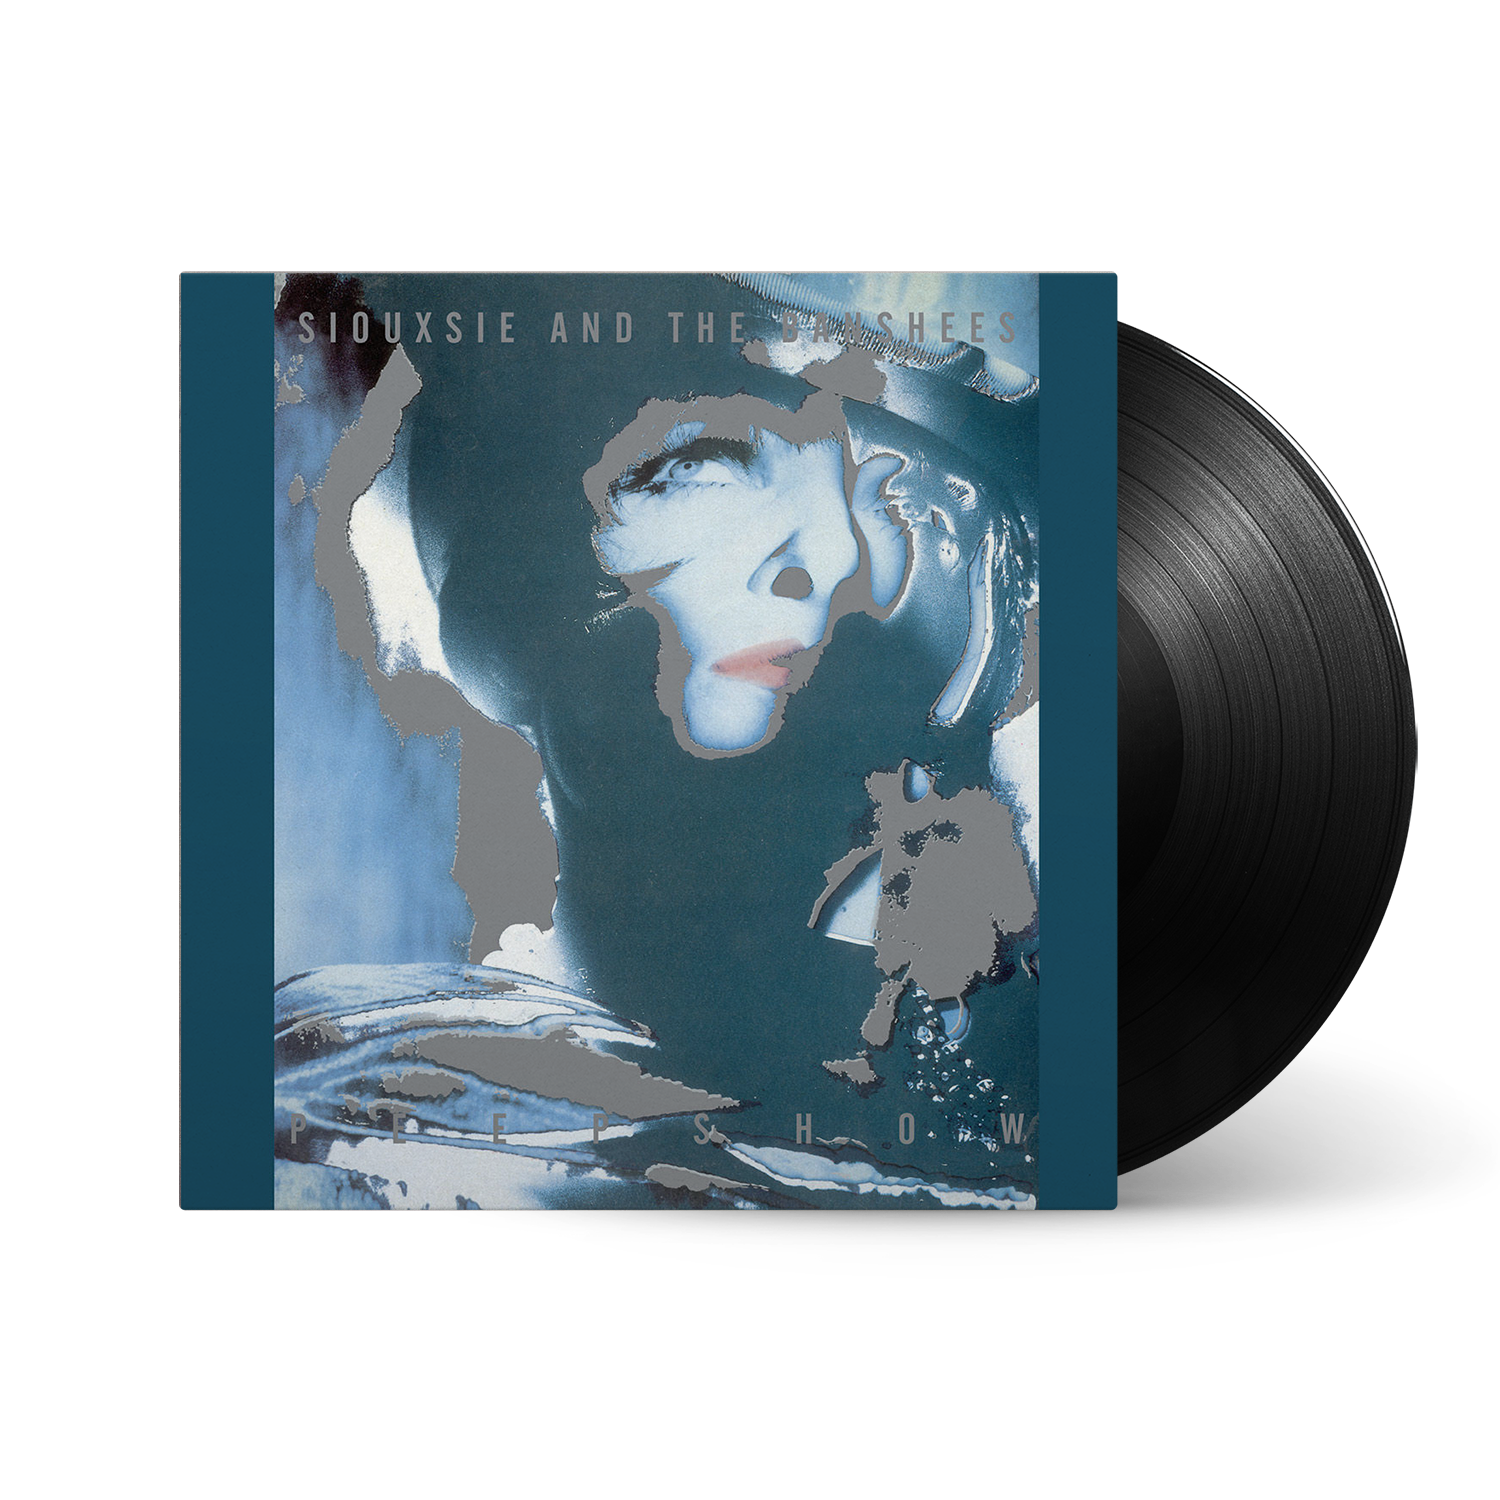 Siouxsie And The Banshees - Peepshow: Vinyl LP